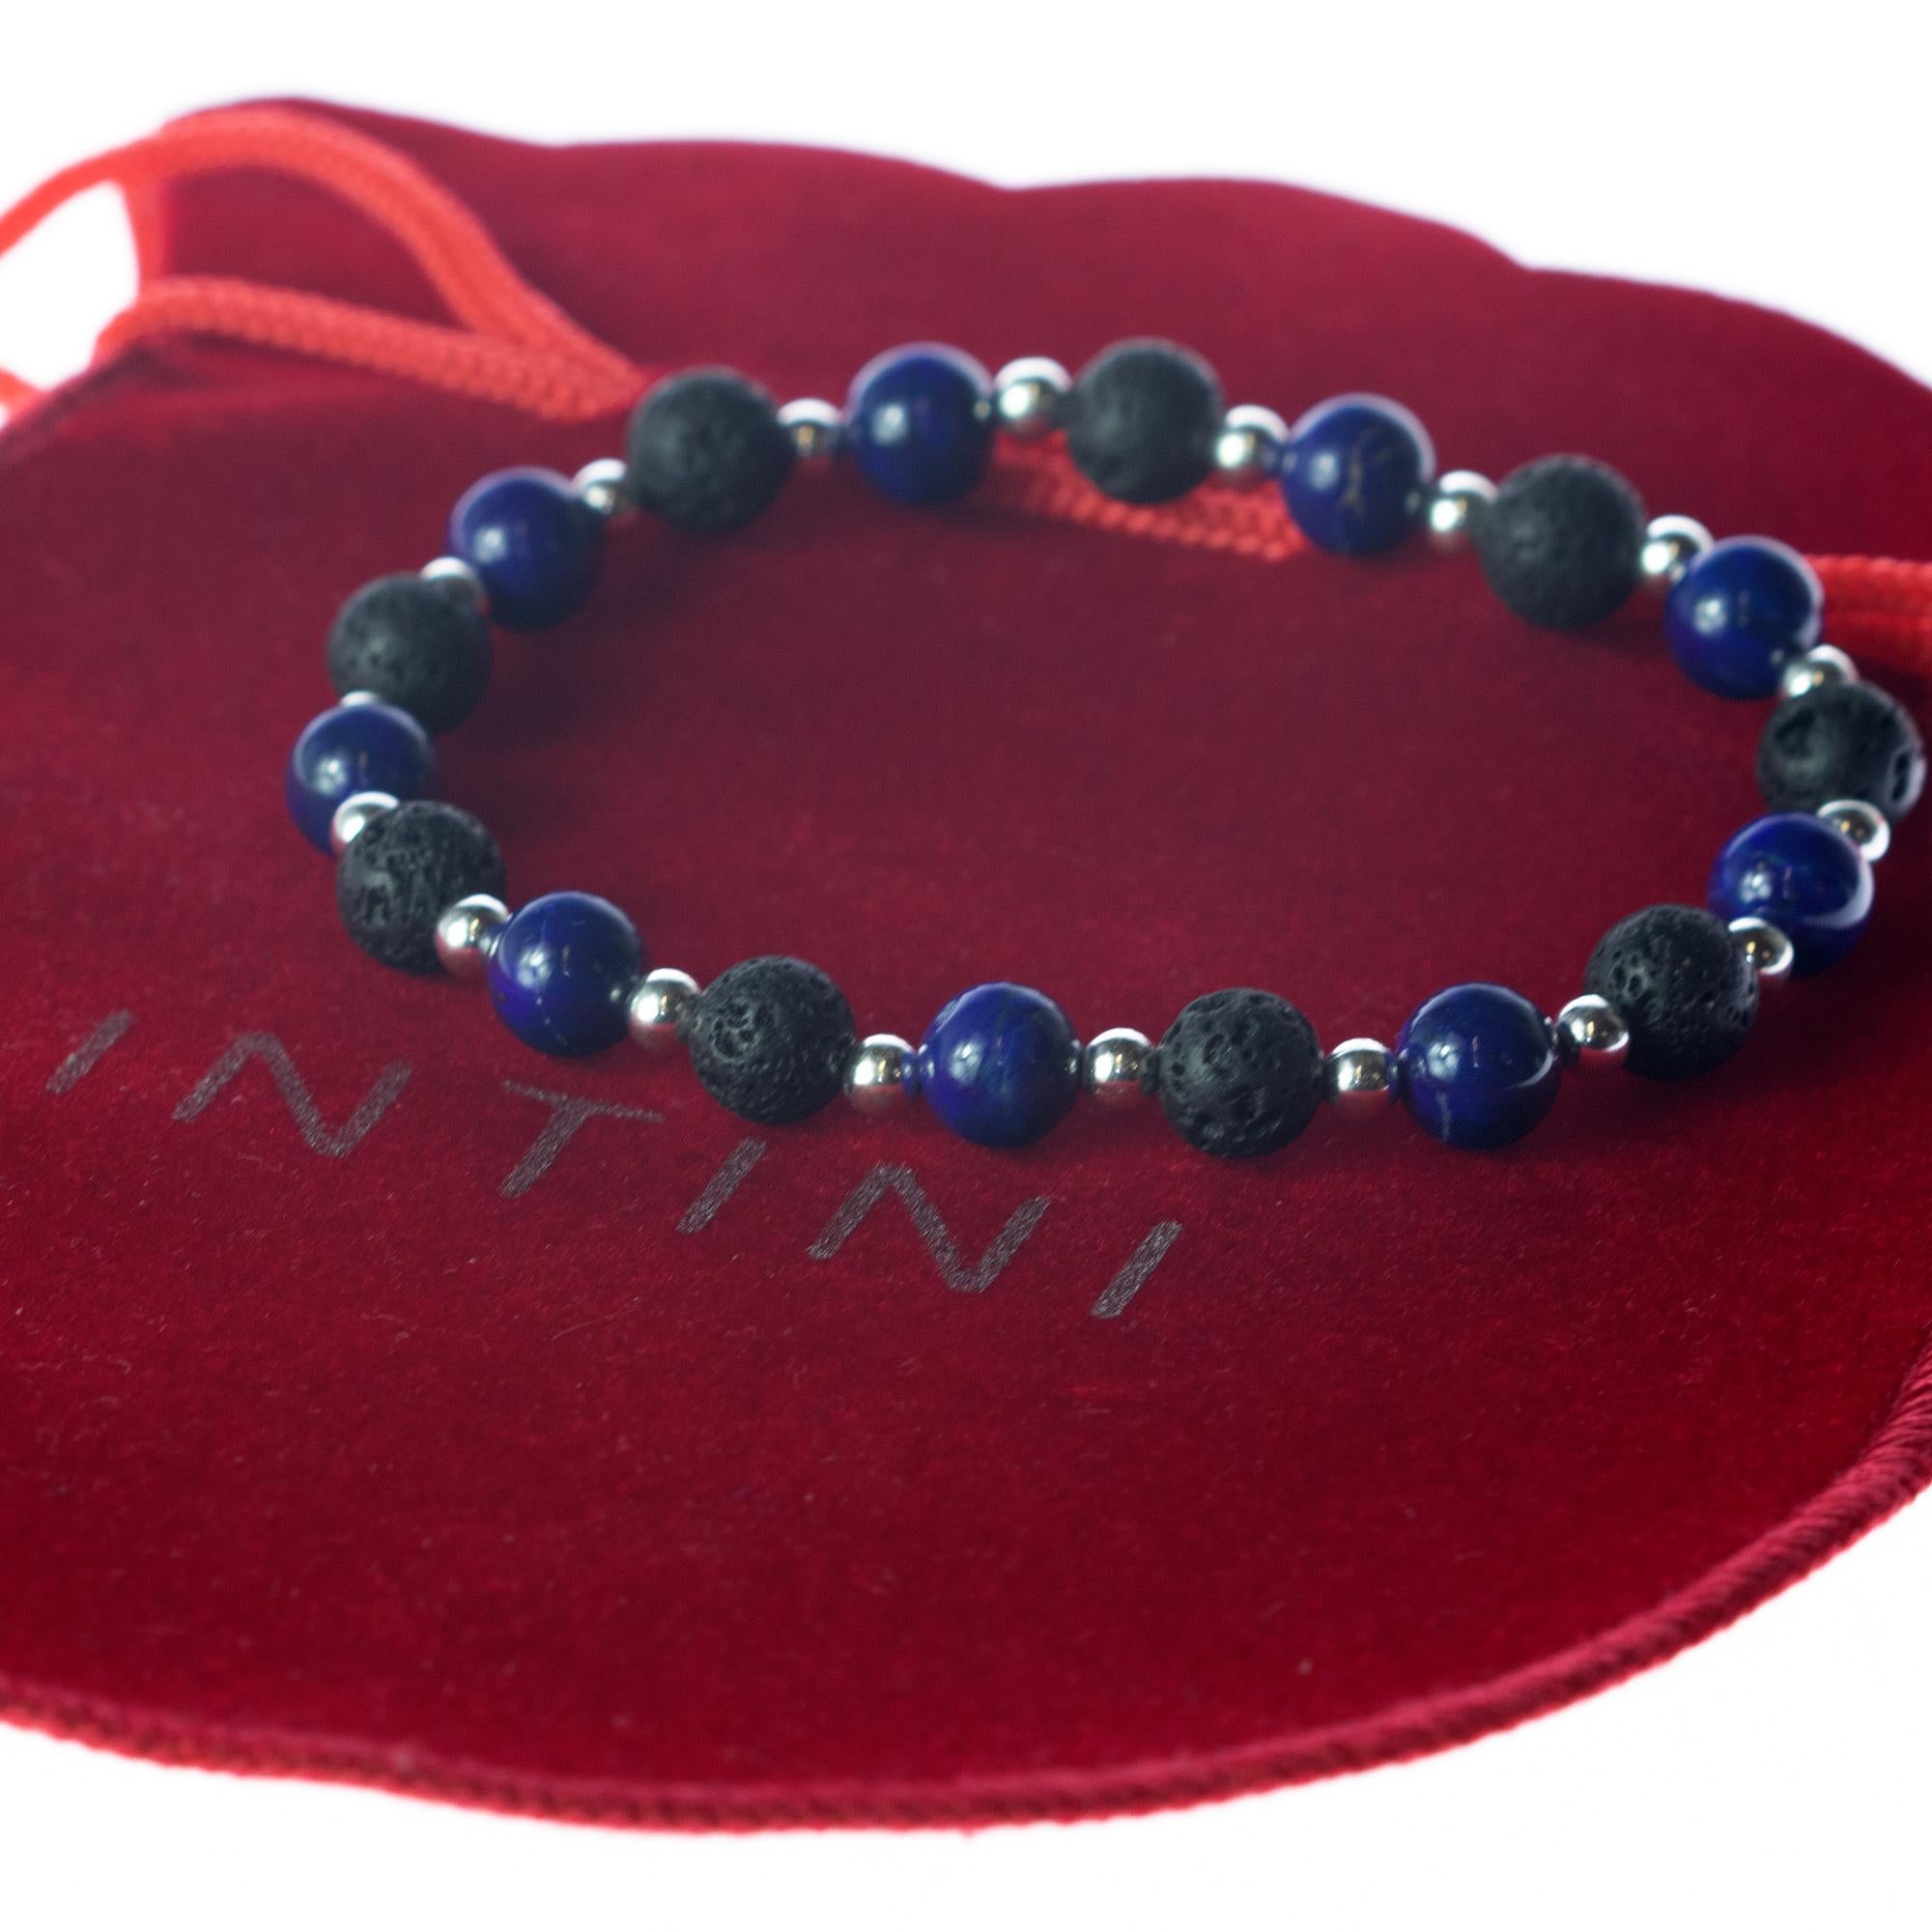 Wonderful bracelet featuring high quality Natural lapis Lazuli along with silver balls and lava stone.
Modern men jewelry, the perfect gift idea for him.

The stretch design serves as the solution for all wrist sizes.

• Lapis Lazuli 8 mm
• Lava